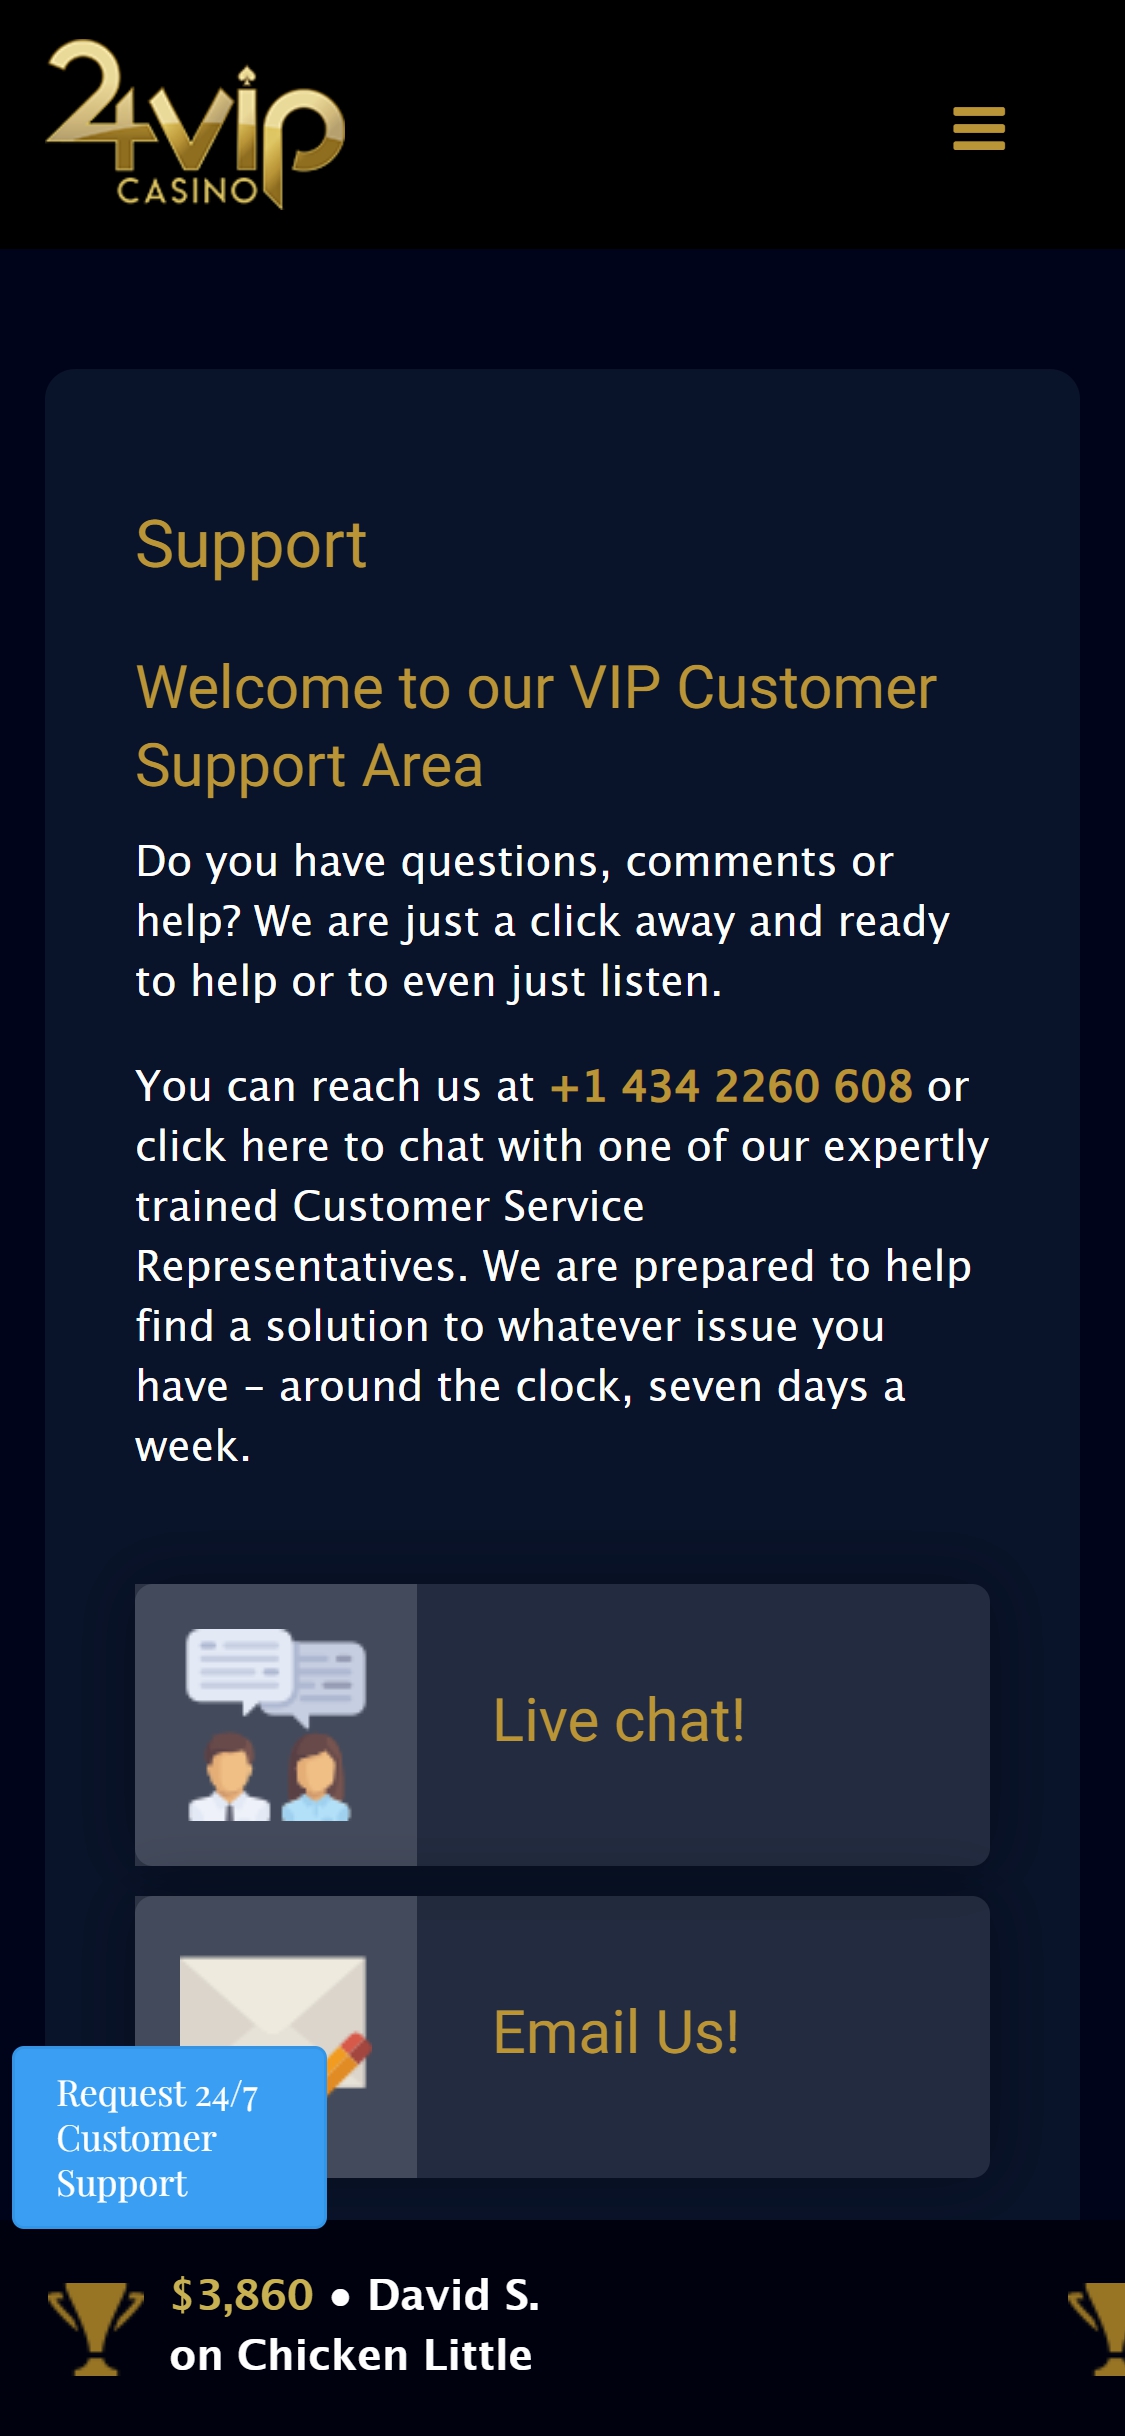 24VIP Casino Mobile Support Review